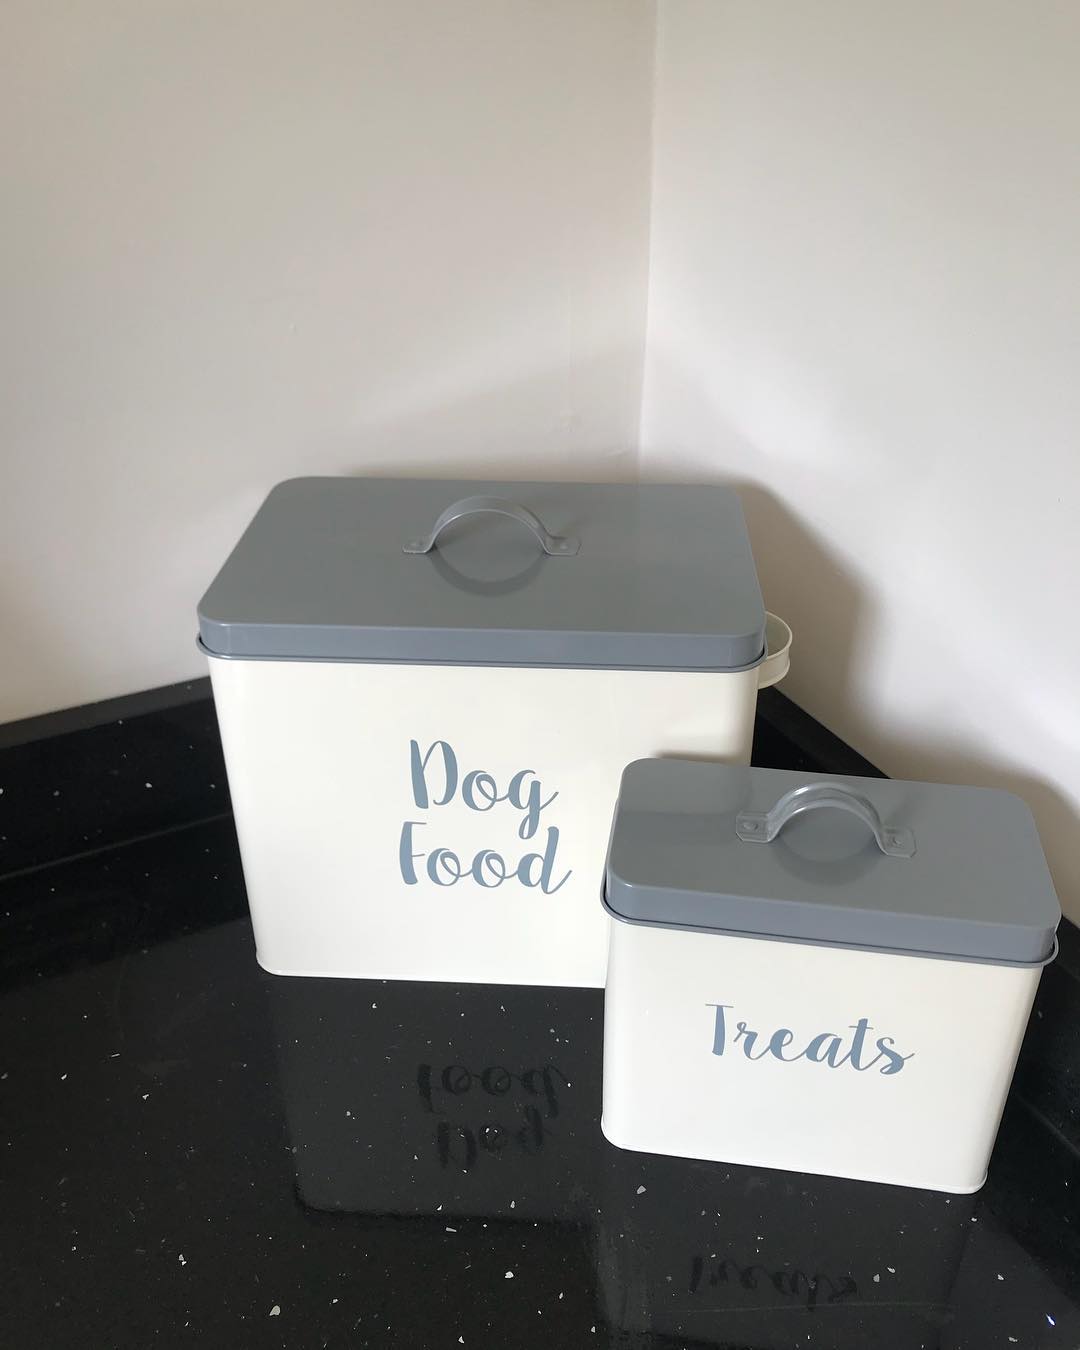 Plastic Boxes Labeled for Dog Food and Treats. Photo by Instagram user @ourhomewithcharlie